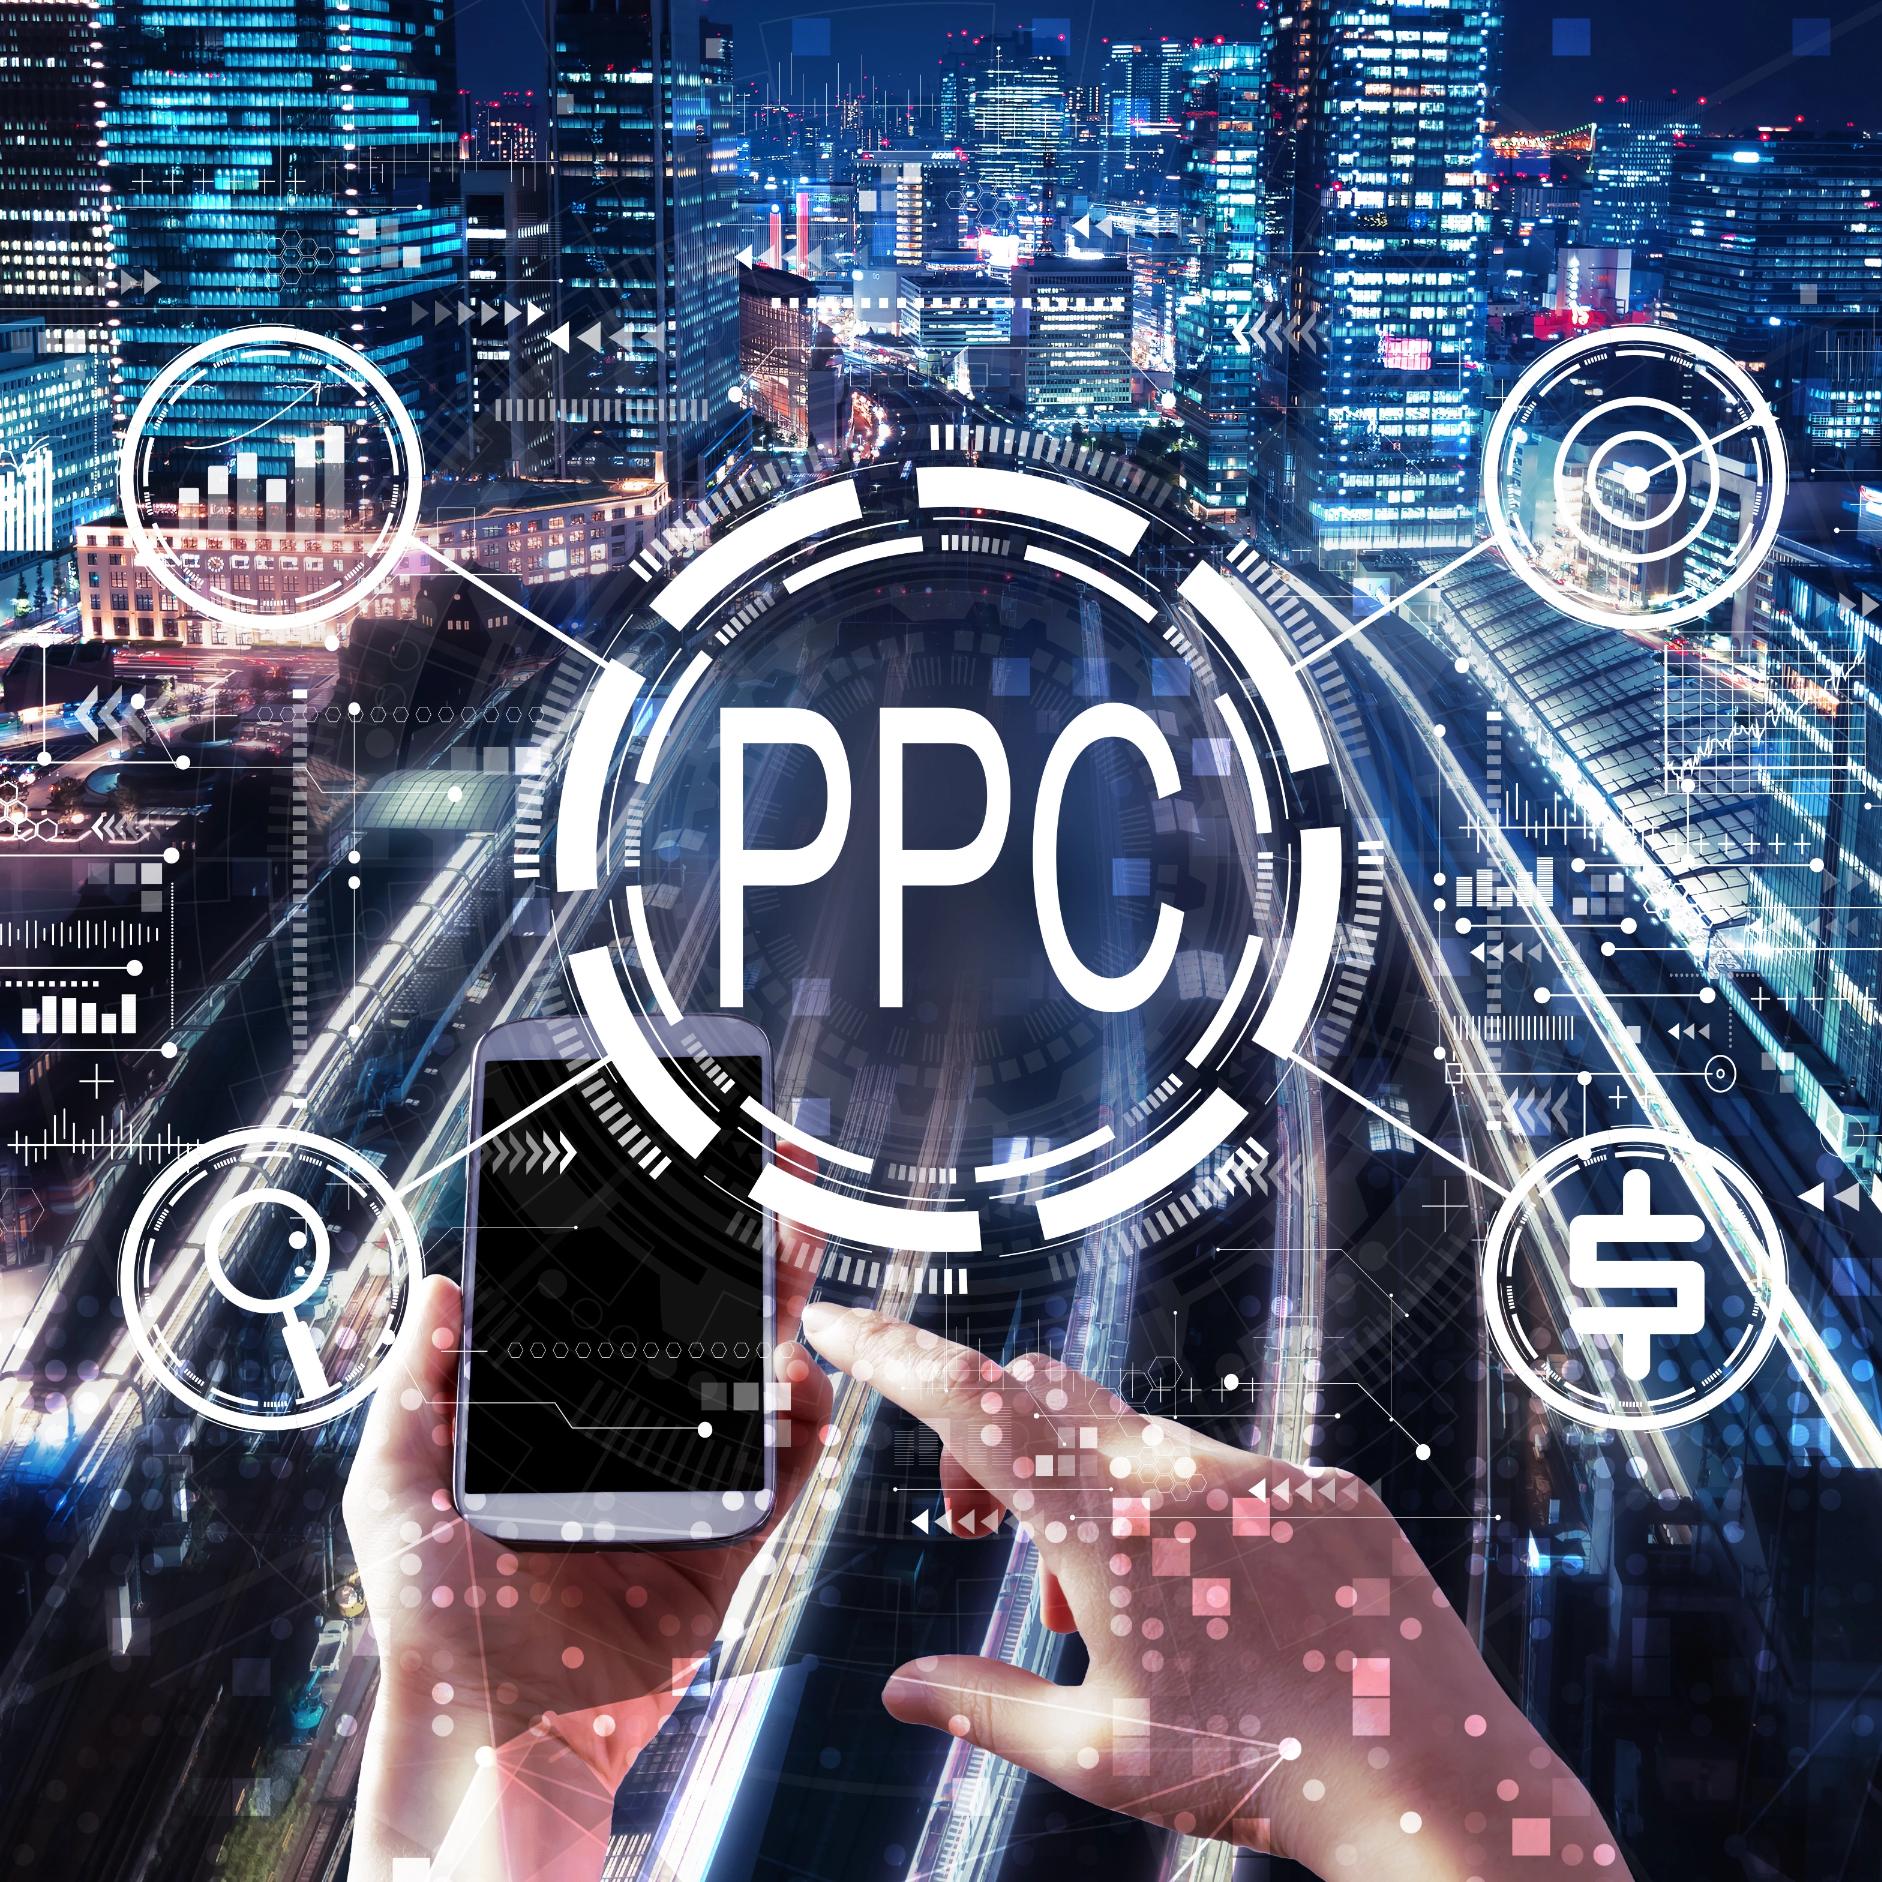 Related ppc services